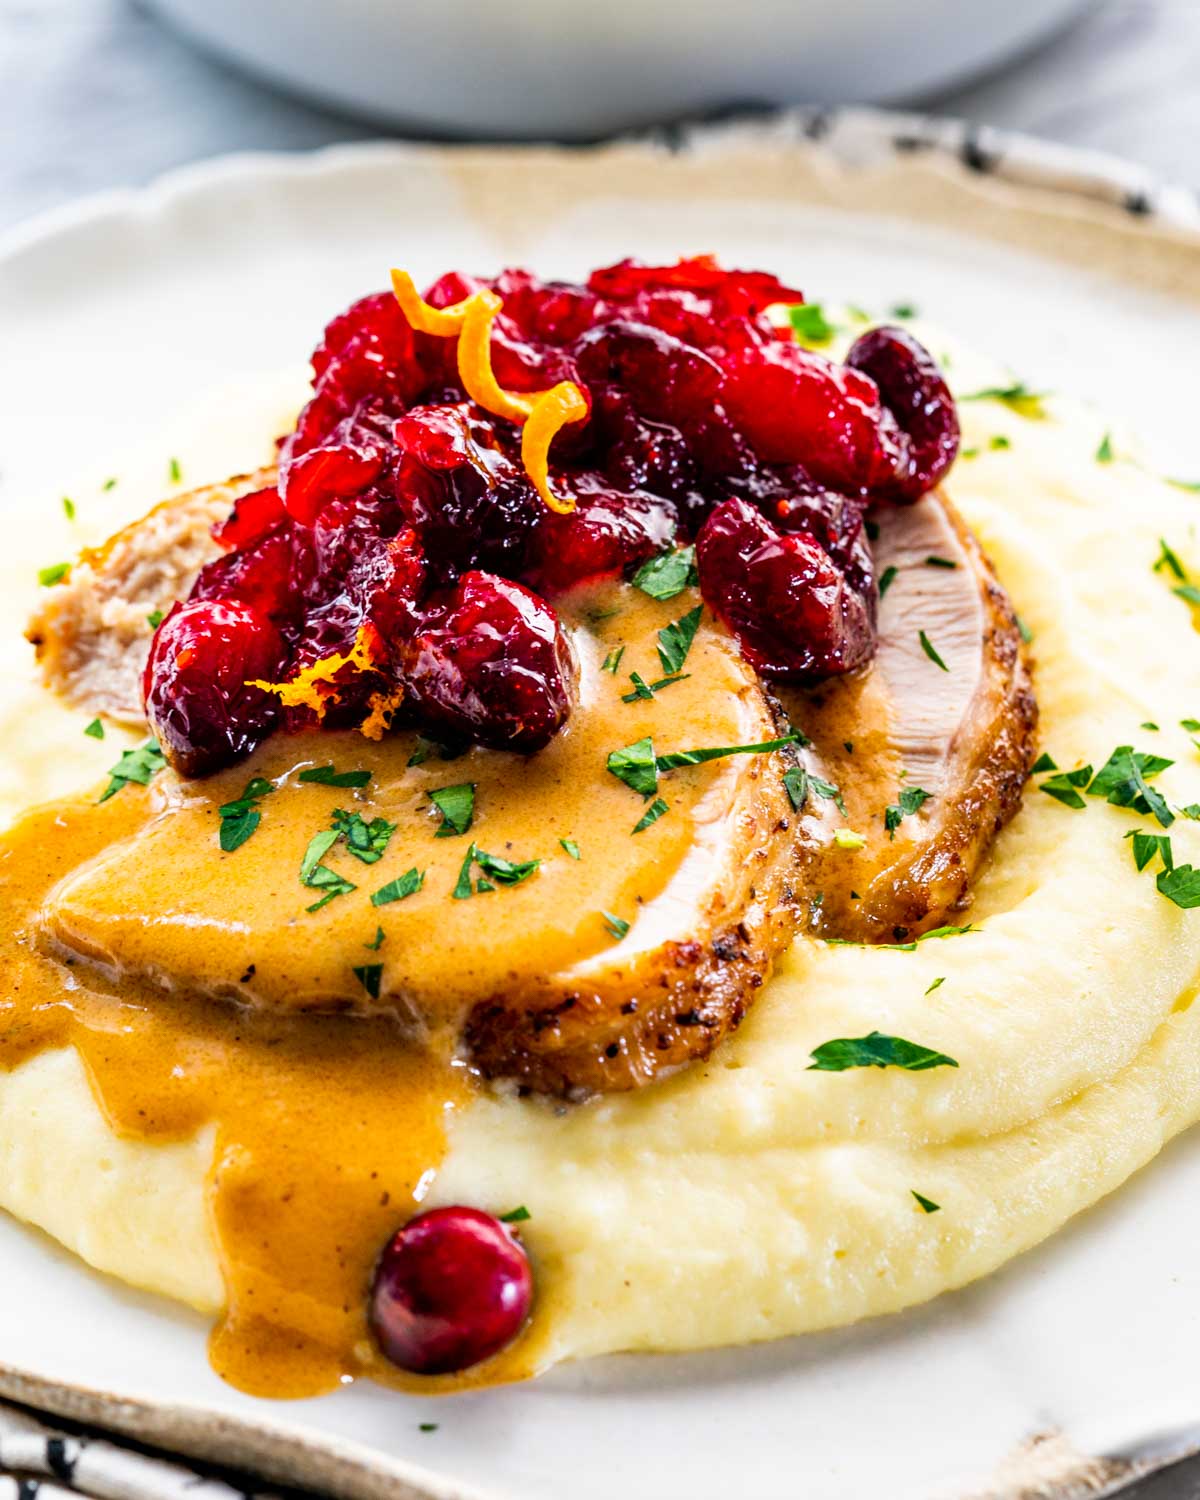 mashed potatoes with 2 slices of turkey breast. gravy and cranberry sauce.